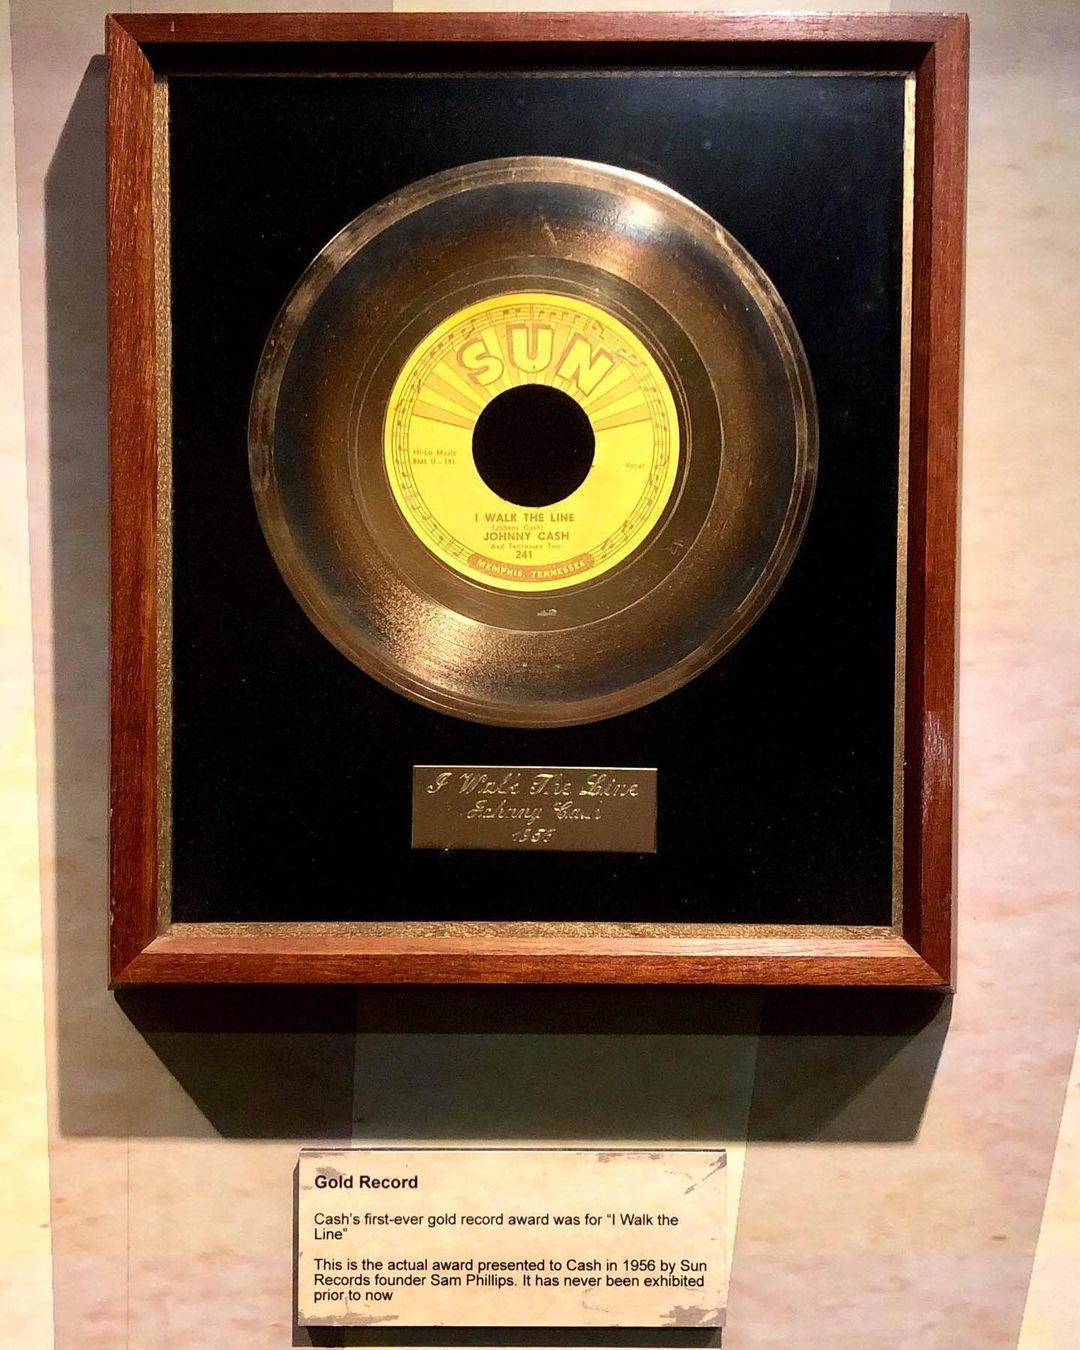 Johnny Cash's Gold Record for Walk the Line at the Johnny Cash Museum. Photo by Instagram user @cashmuseum